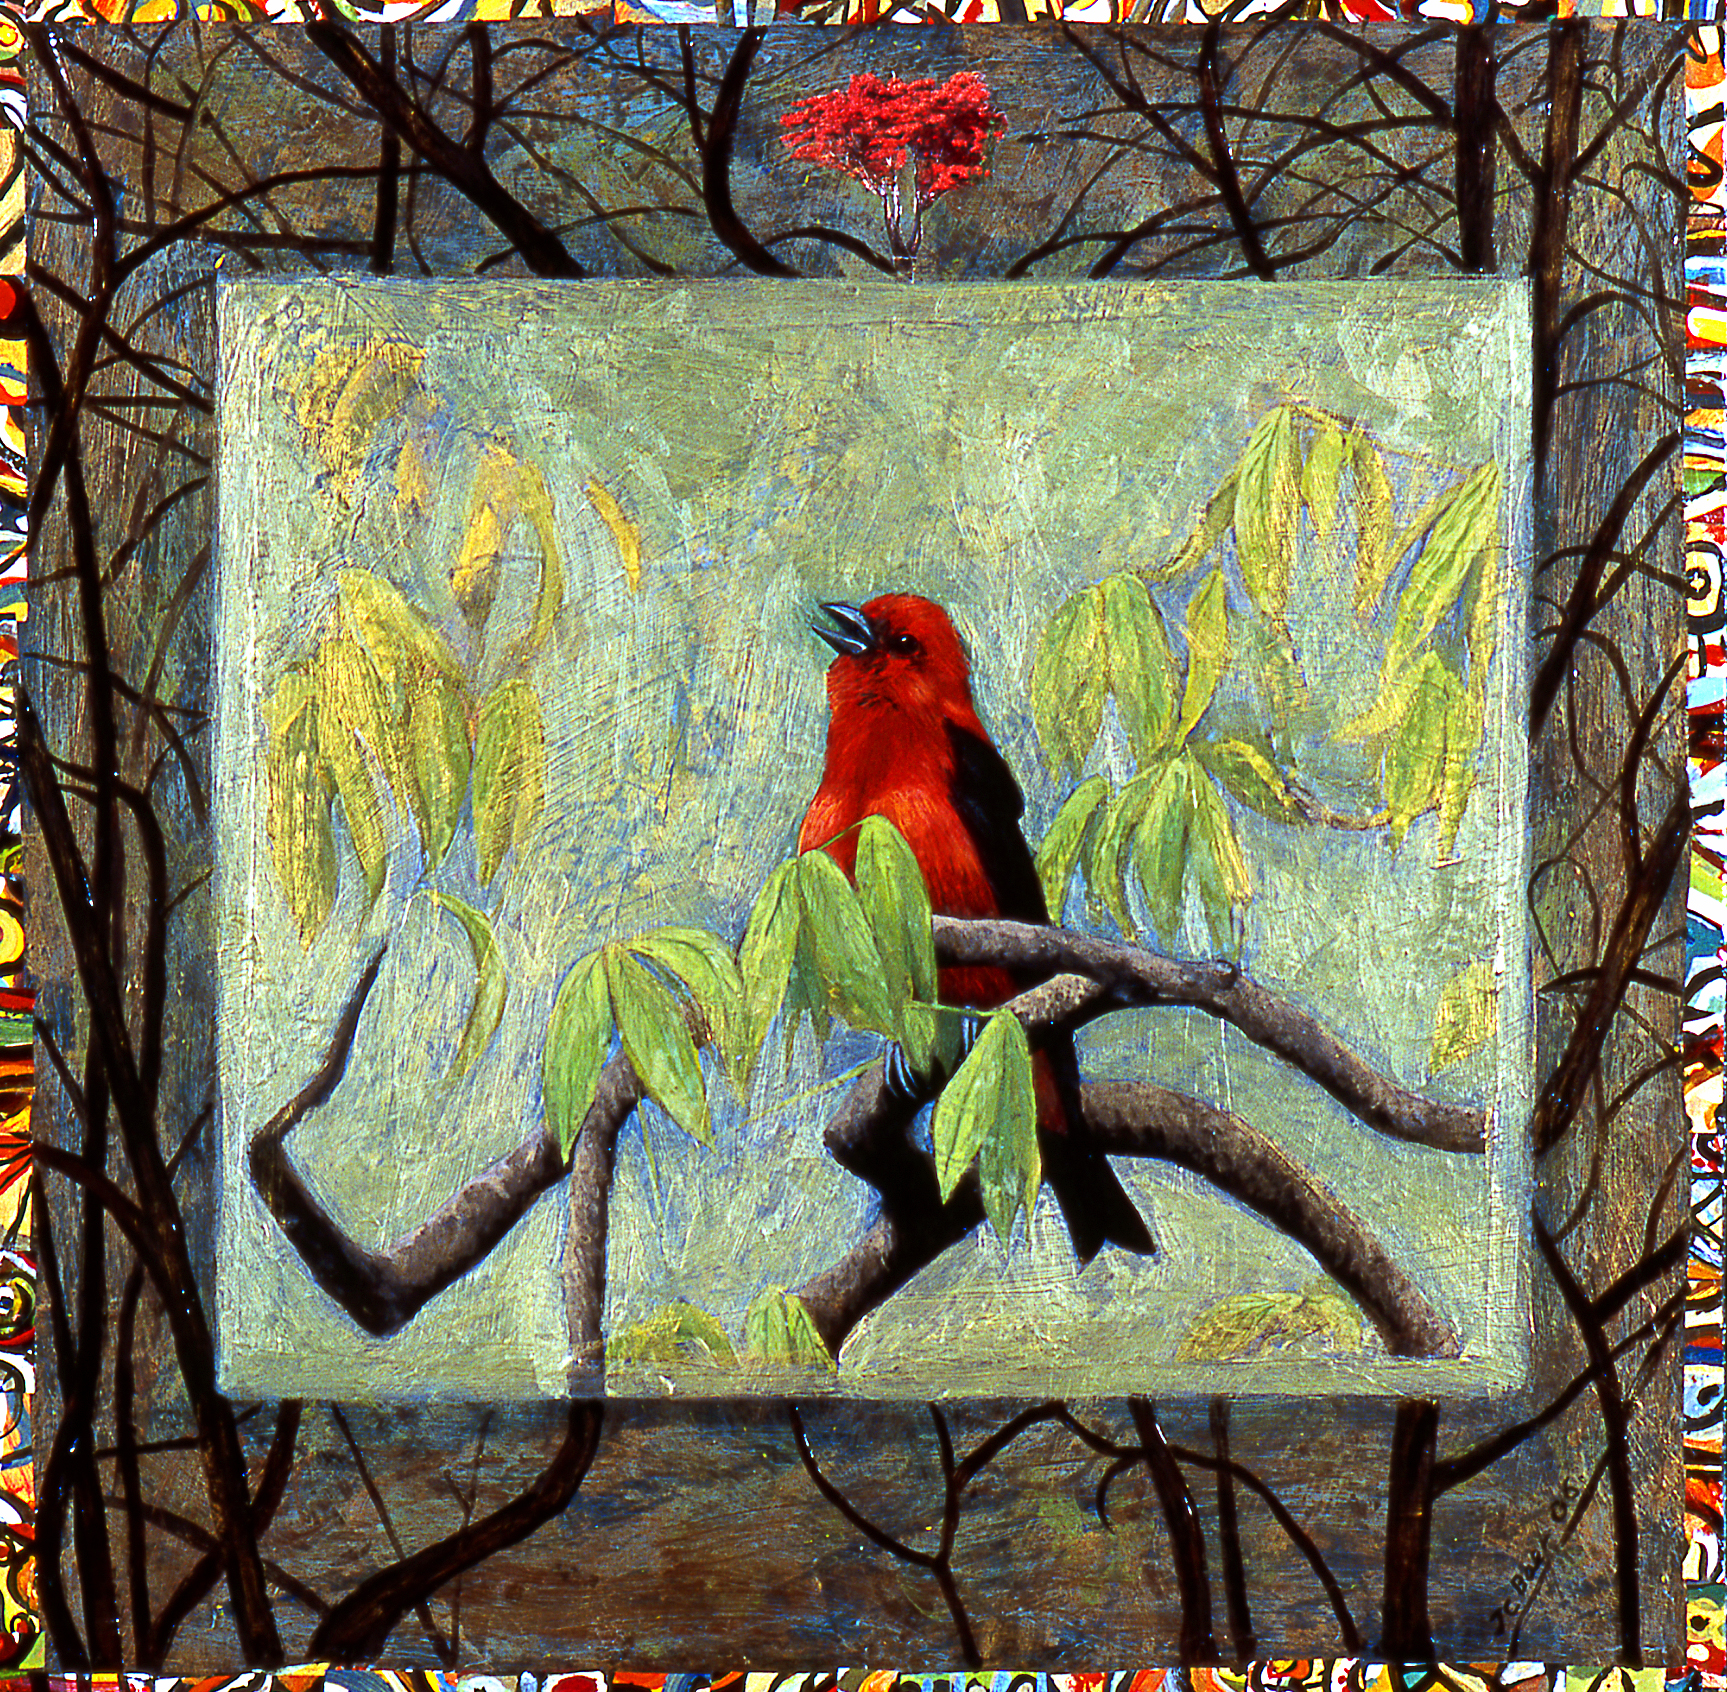 Scarlet Tanager, 2006, 24” x 24”, mixed media gouache and acrylic on wood panel, $2500